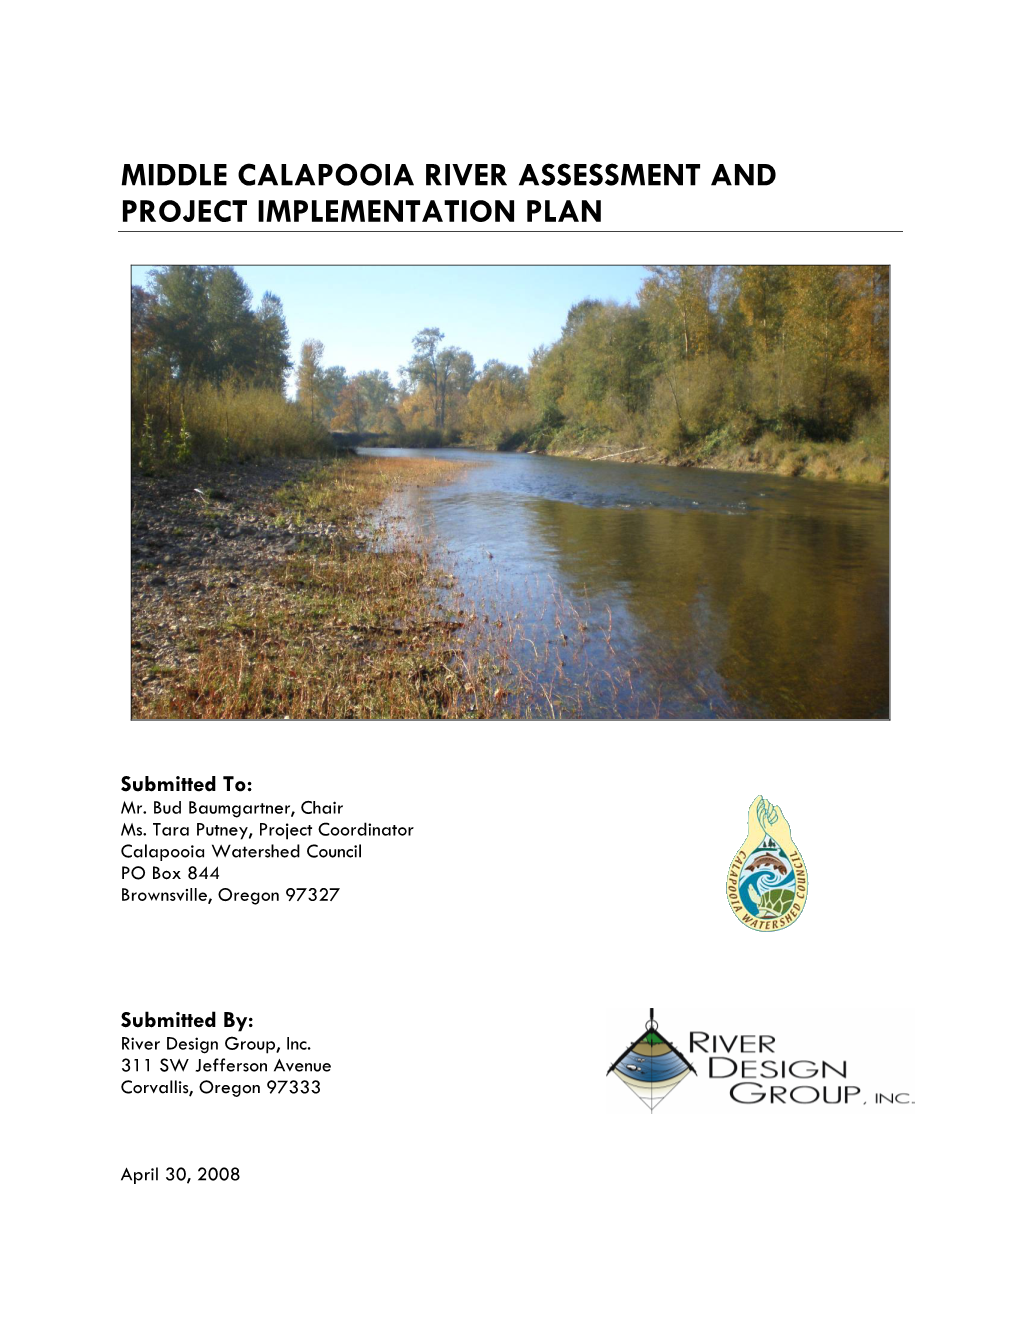 Middle Calapooia River Assessment and Project Implementation Plan